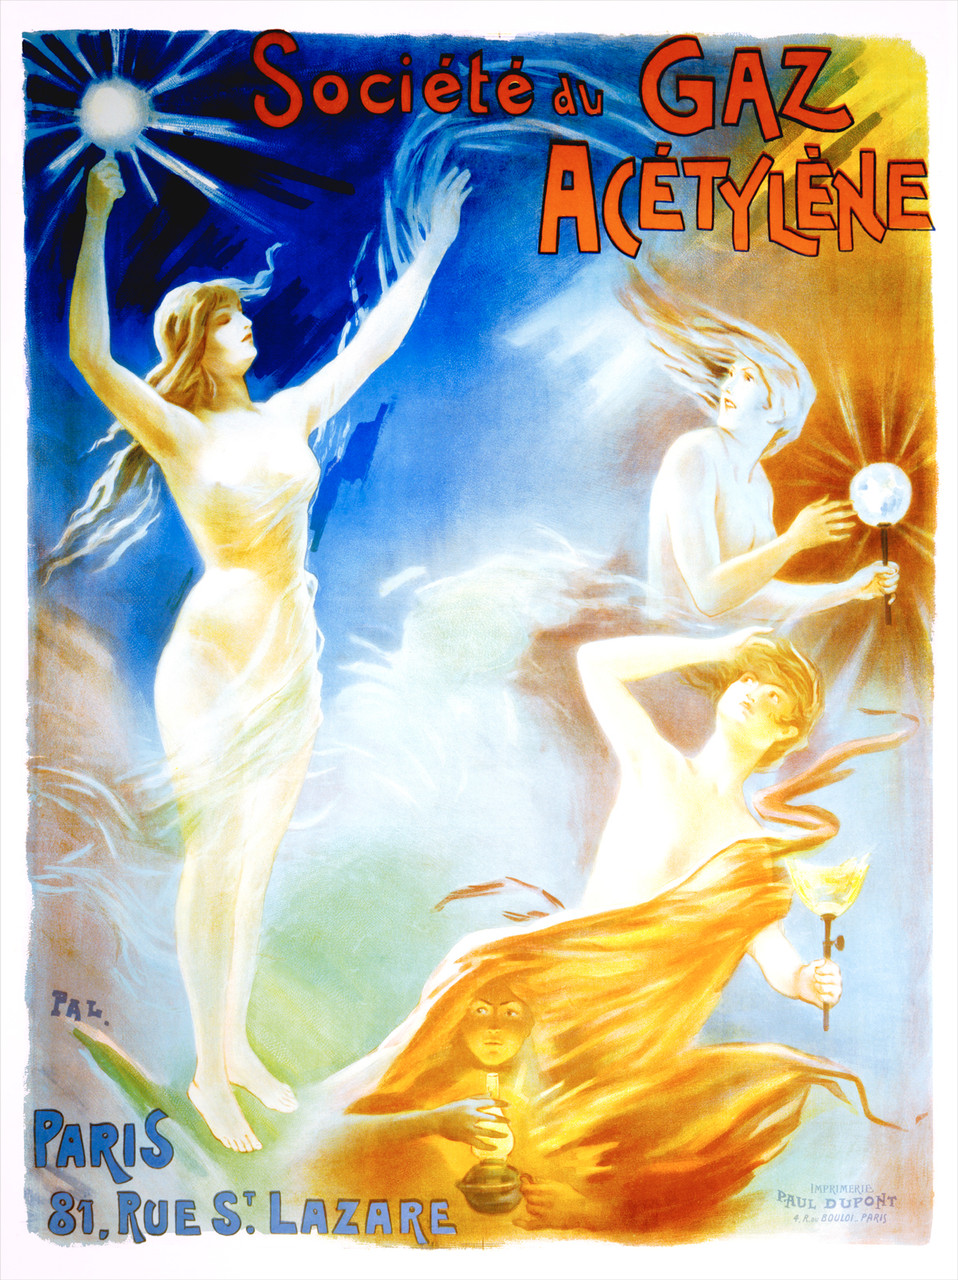 Societe du Gaz Acetylene by Pal 1898 France - Vintage Poster Reproduction. This vertical French product poster features wind blown women appearing from the clouds with gas lamps against a blue and orange sky. Giclee Advertising Print. Classic Posters